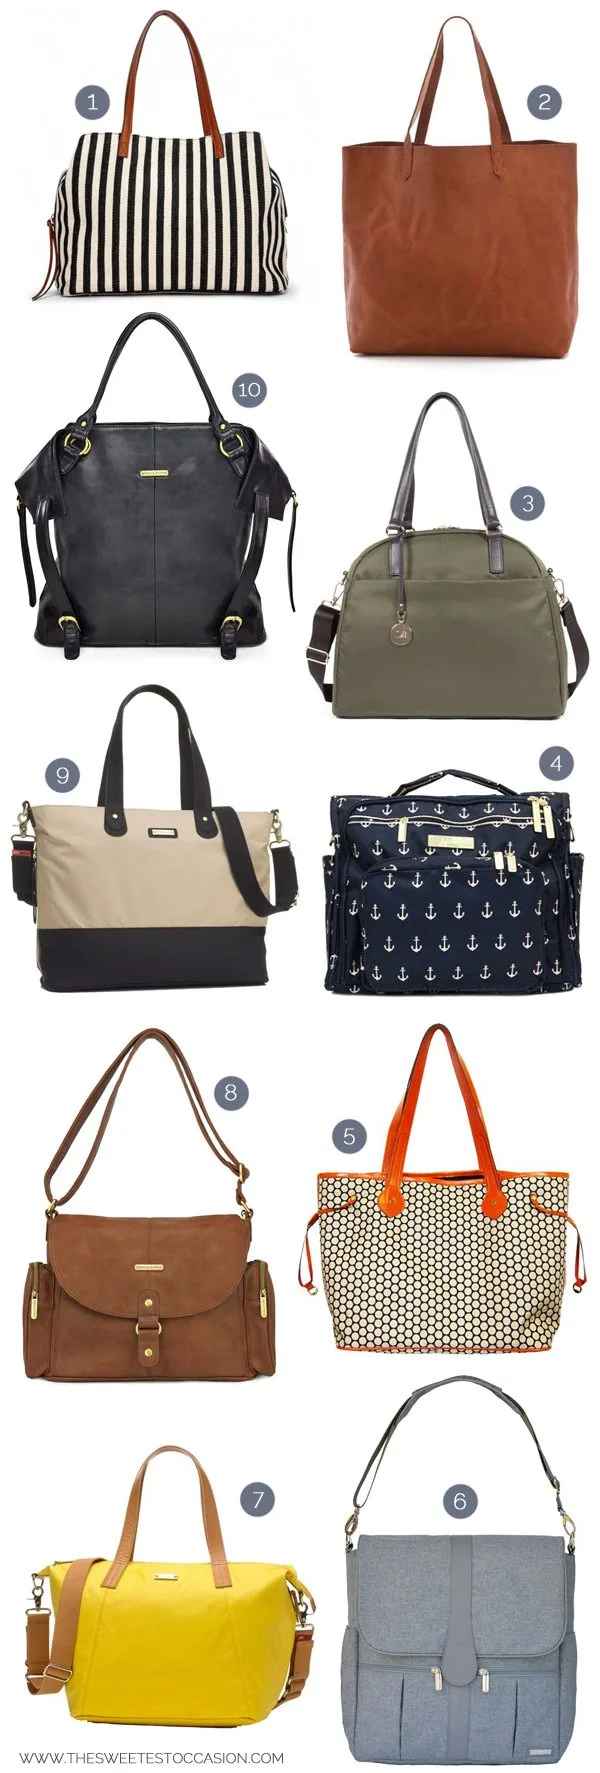 10 Super Stylish Diaper Bags - The Sweetest Occasion